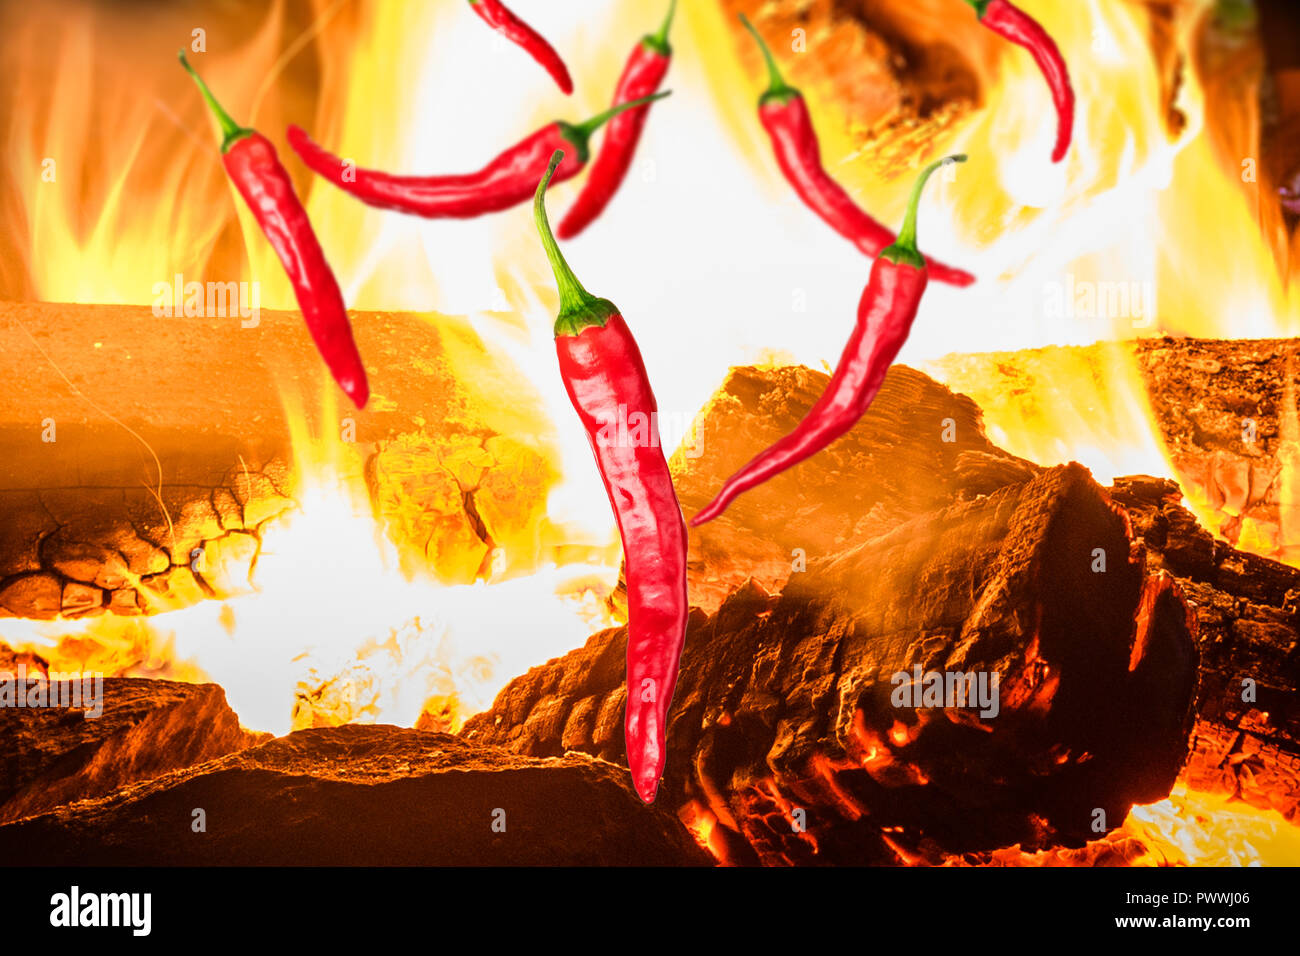 a few pieces of red chili peppers on background with fire Stock Photo